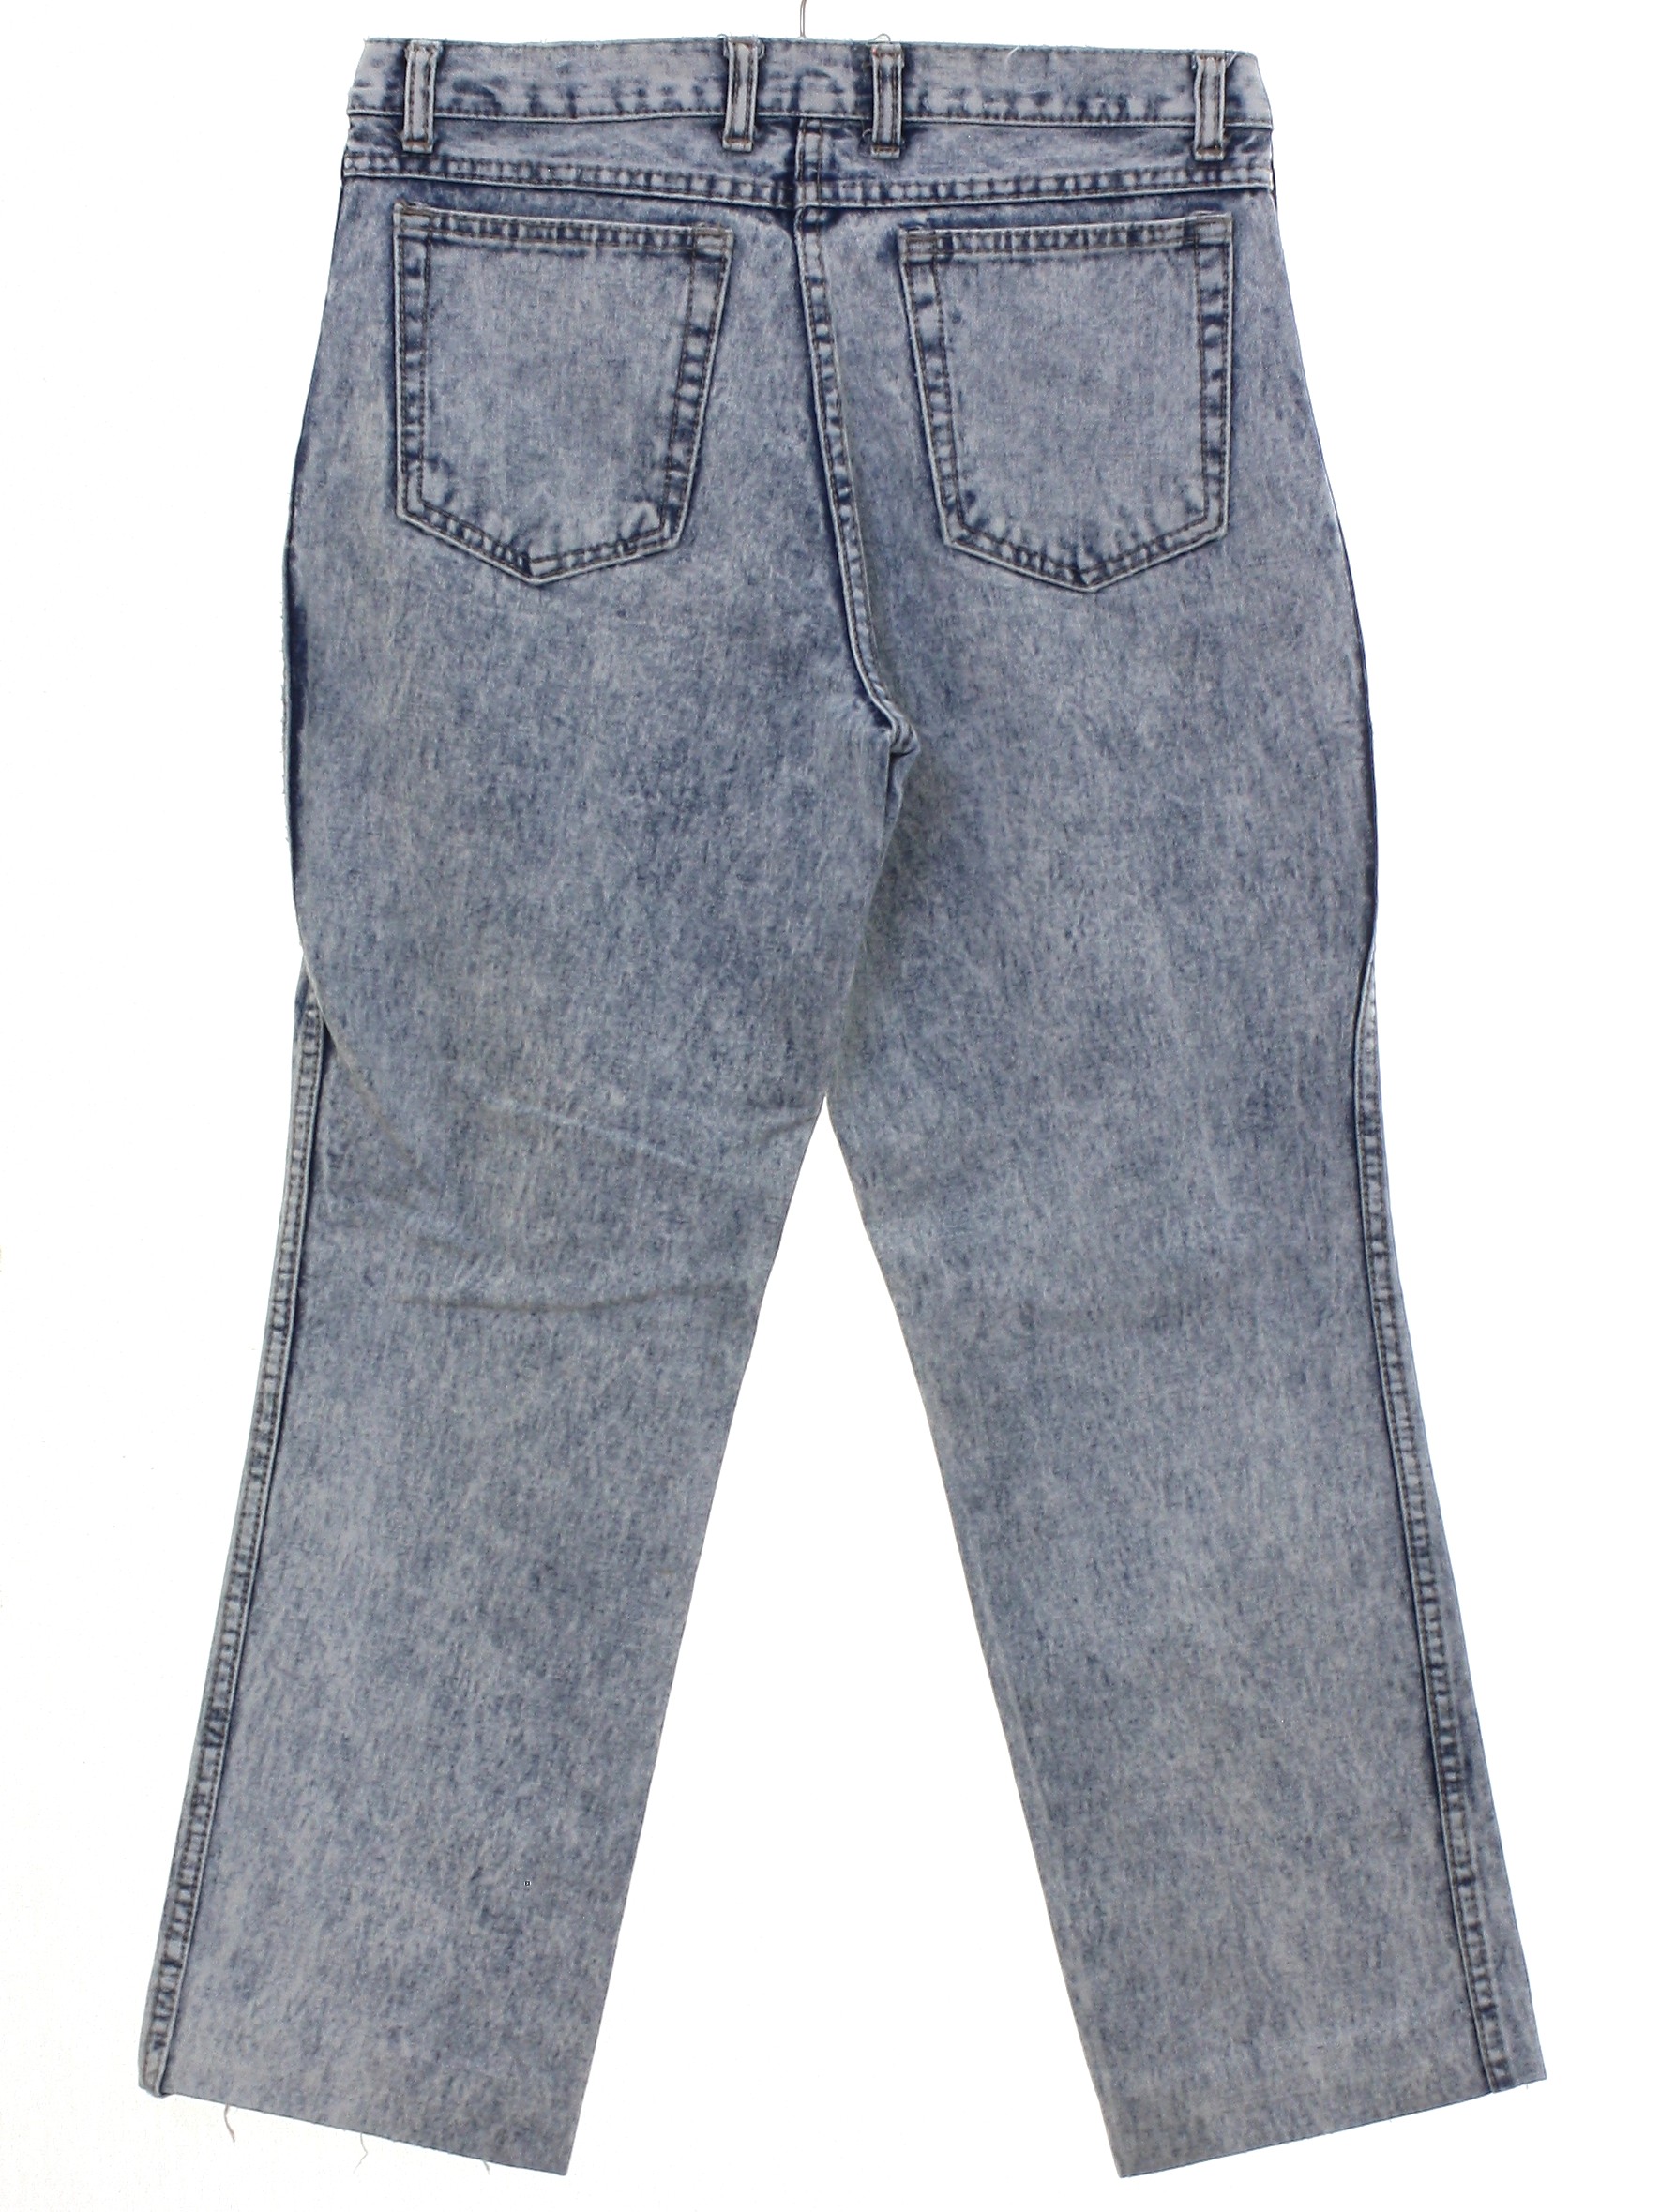 1980's Pants: 80s -No Label (B on Snap)- Womens acid washed light and ...